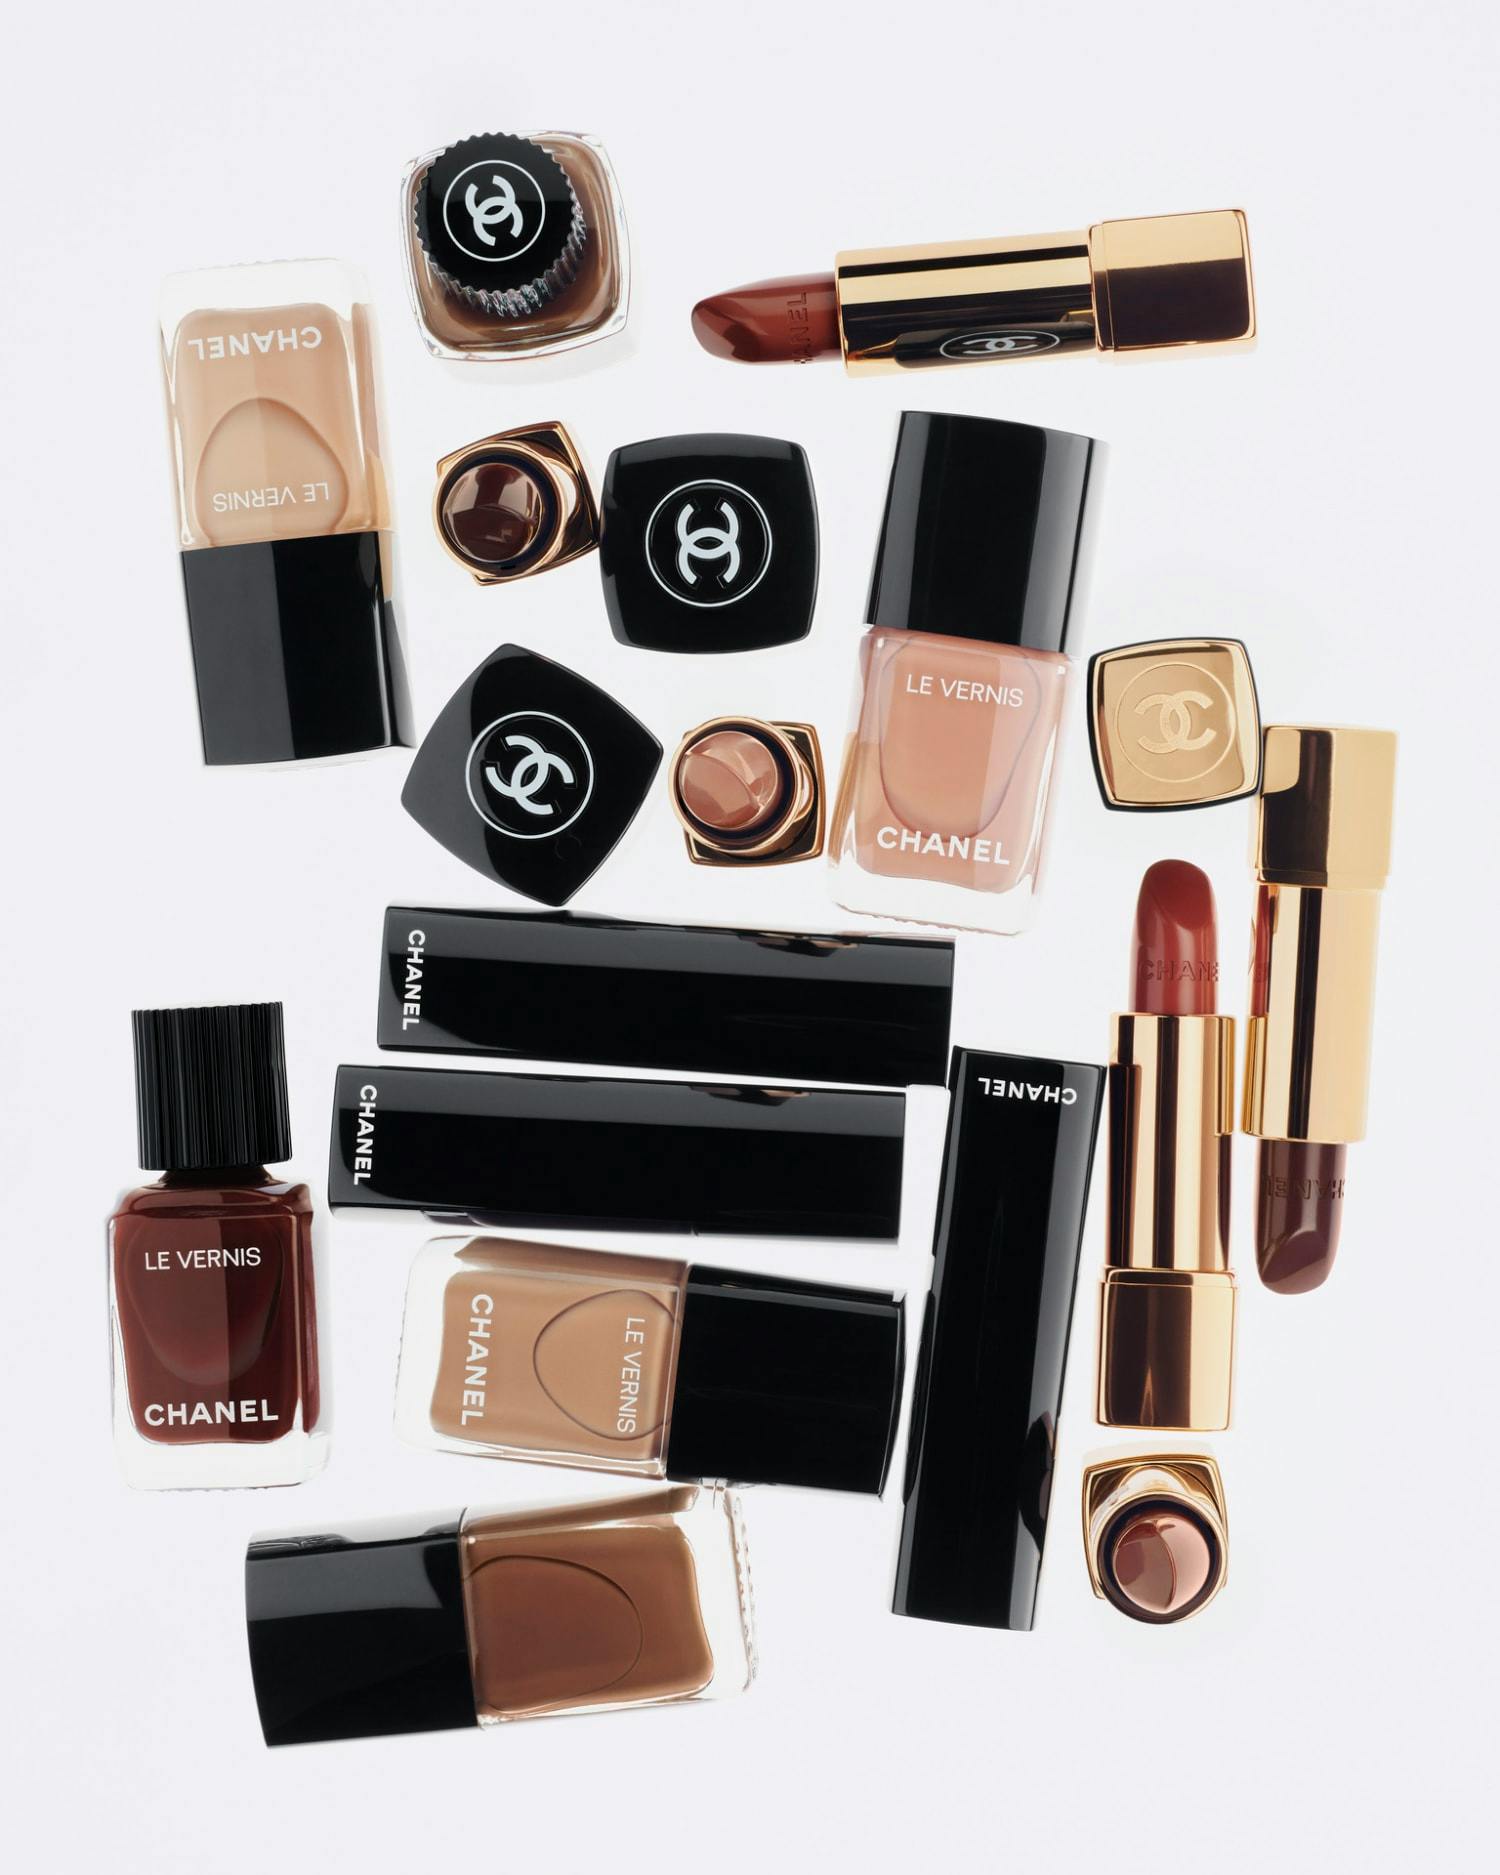 Introducing Les Accords De Chanel – Fall-Winter 2022 Makeup Collection